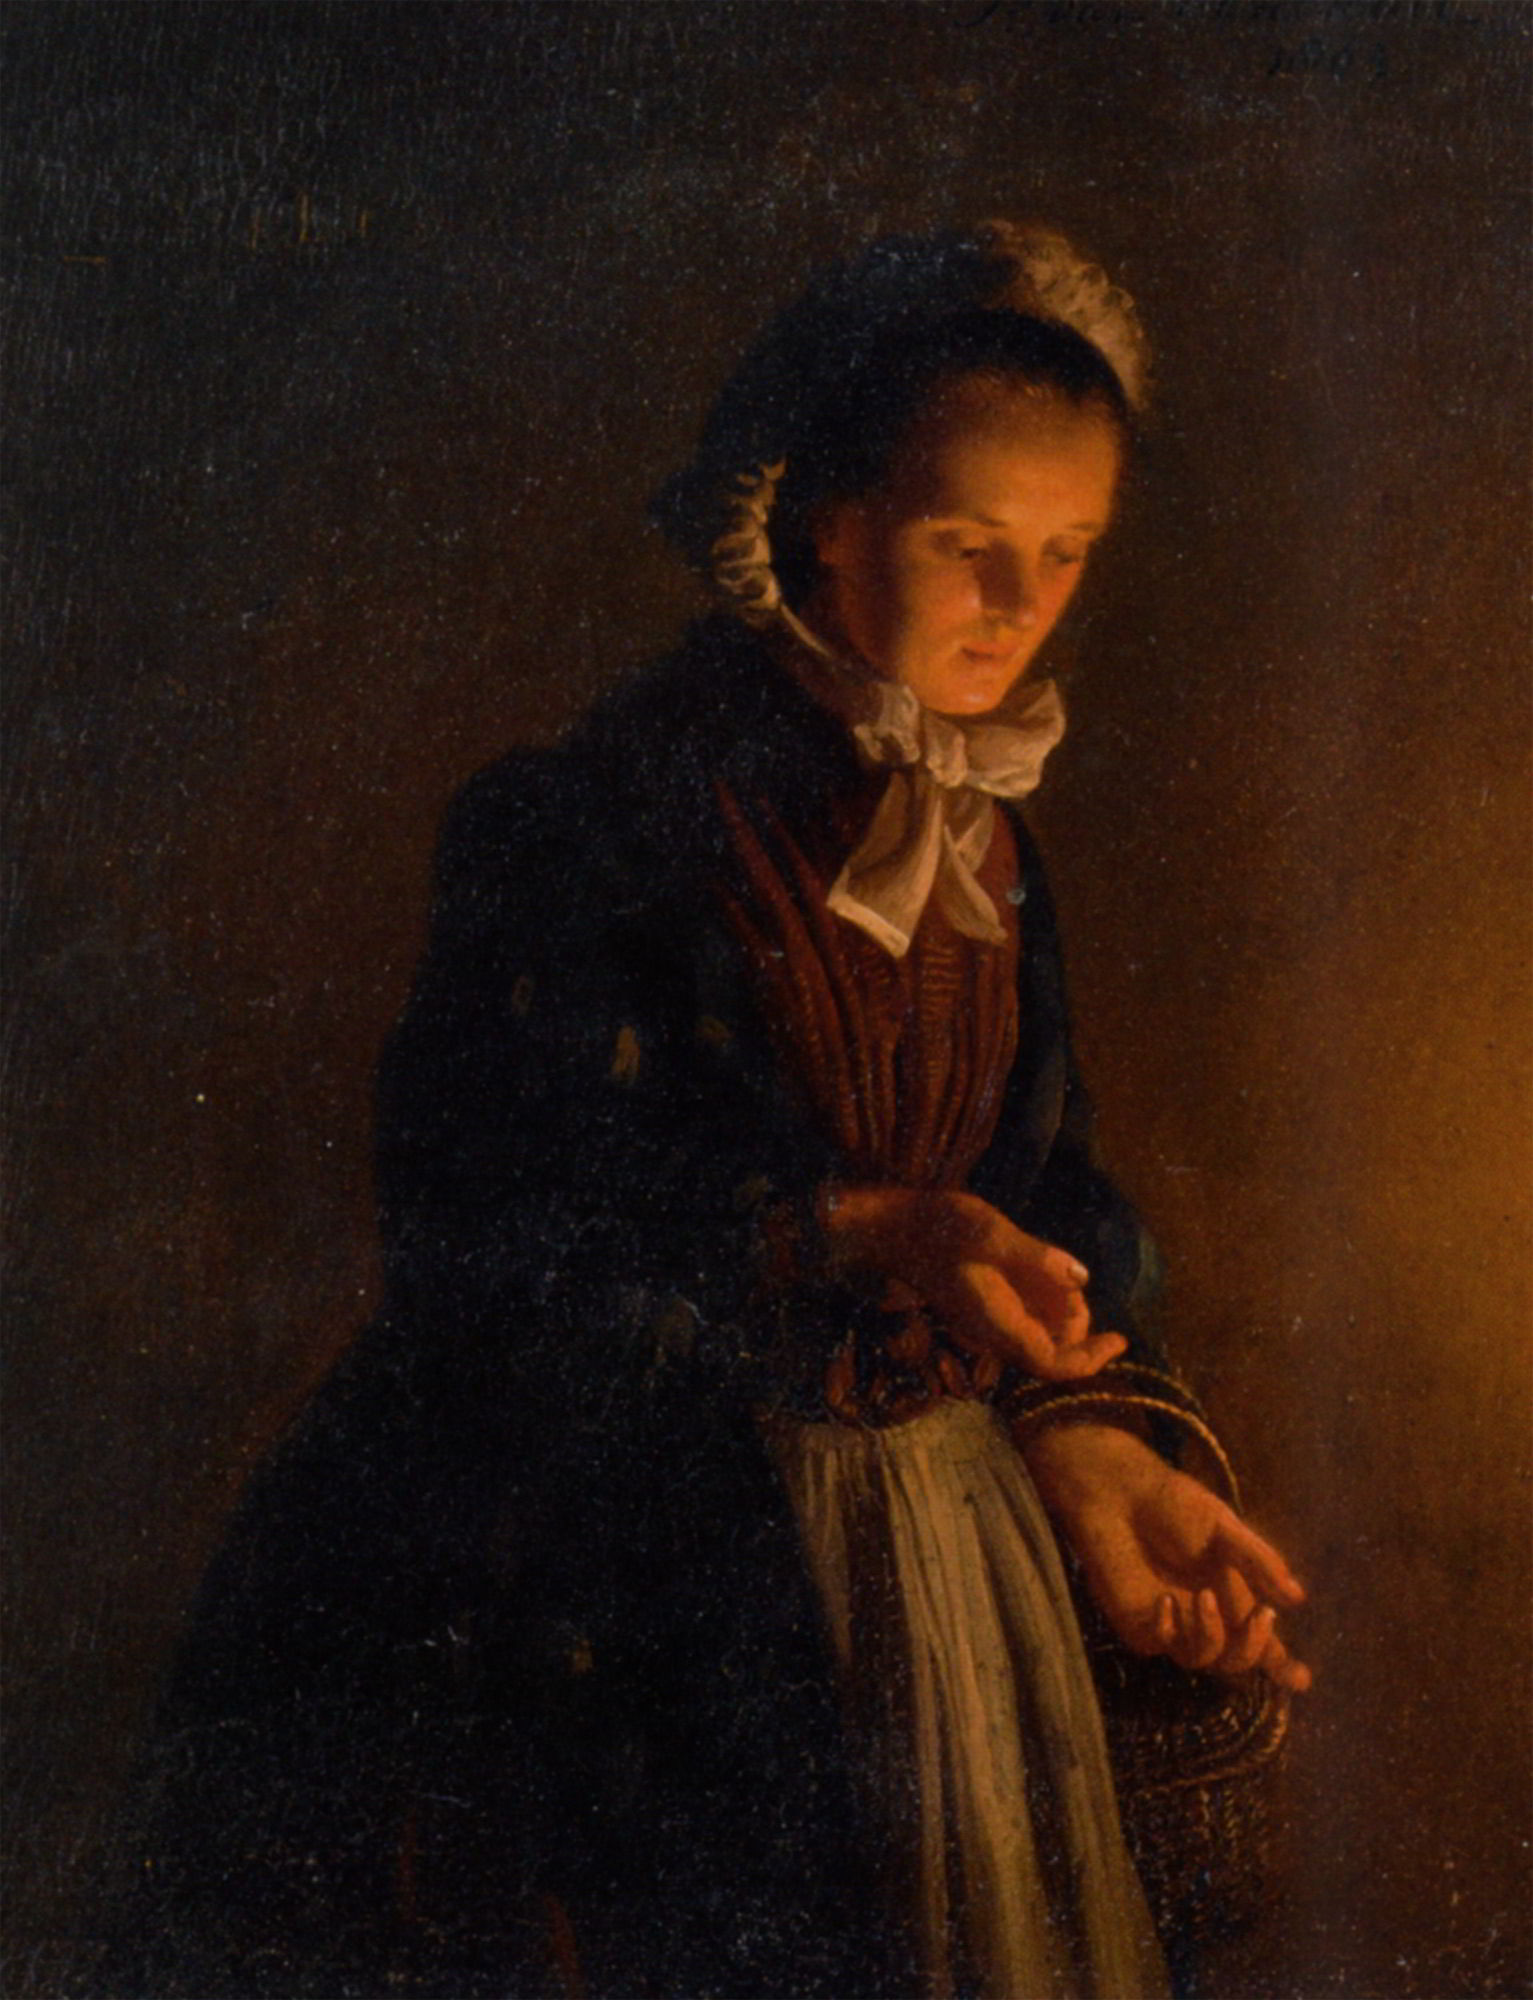 A Servant Girl by Candle Light by Petrus Van Schendel